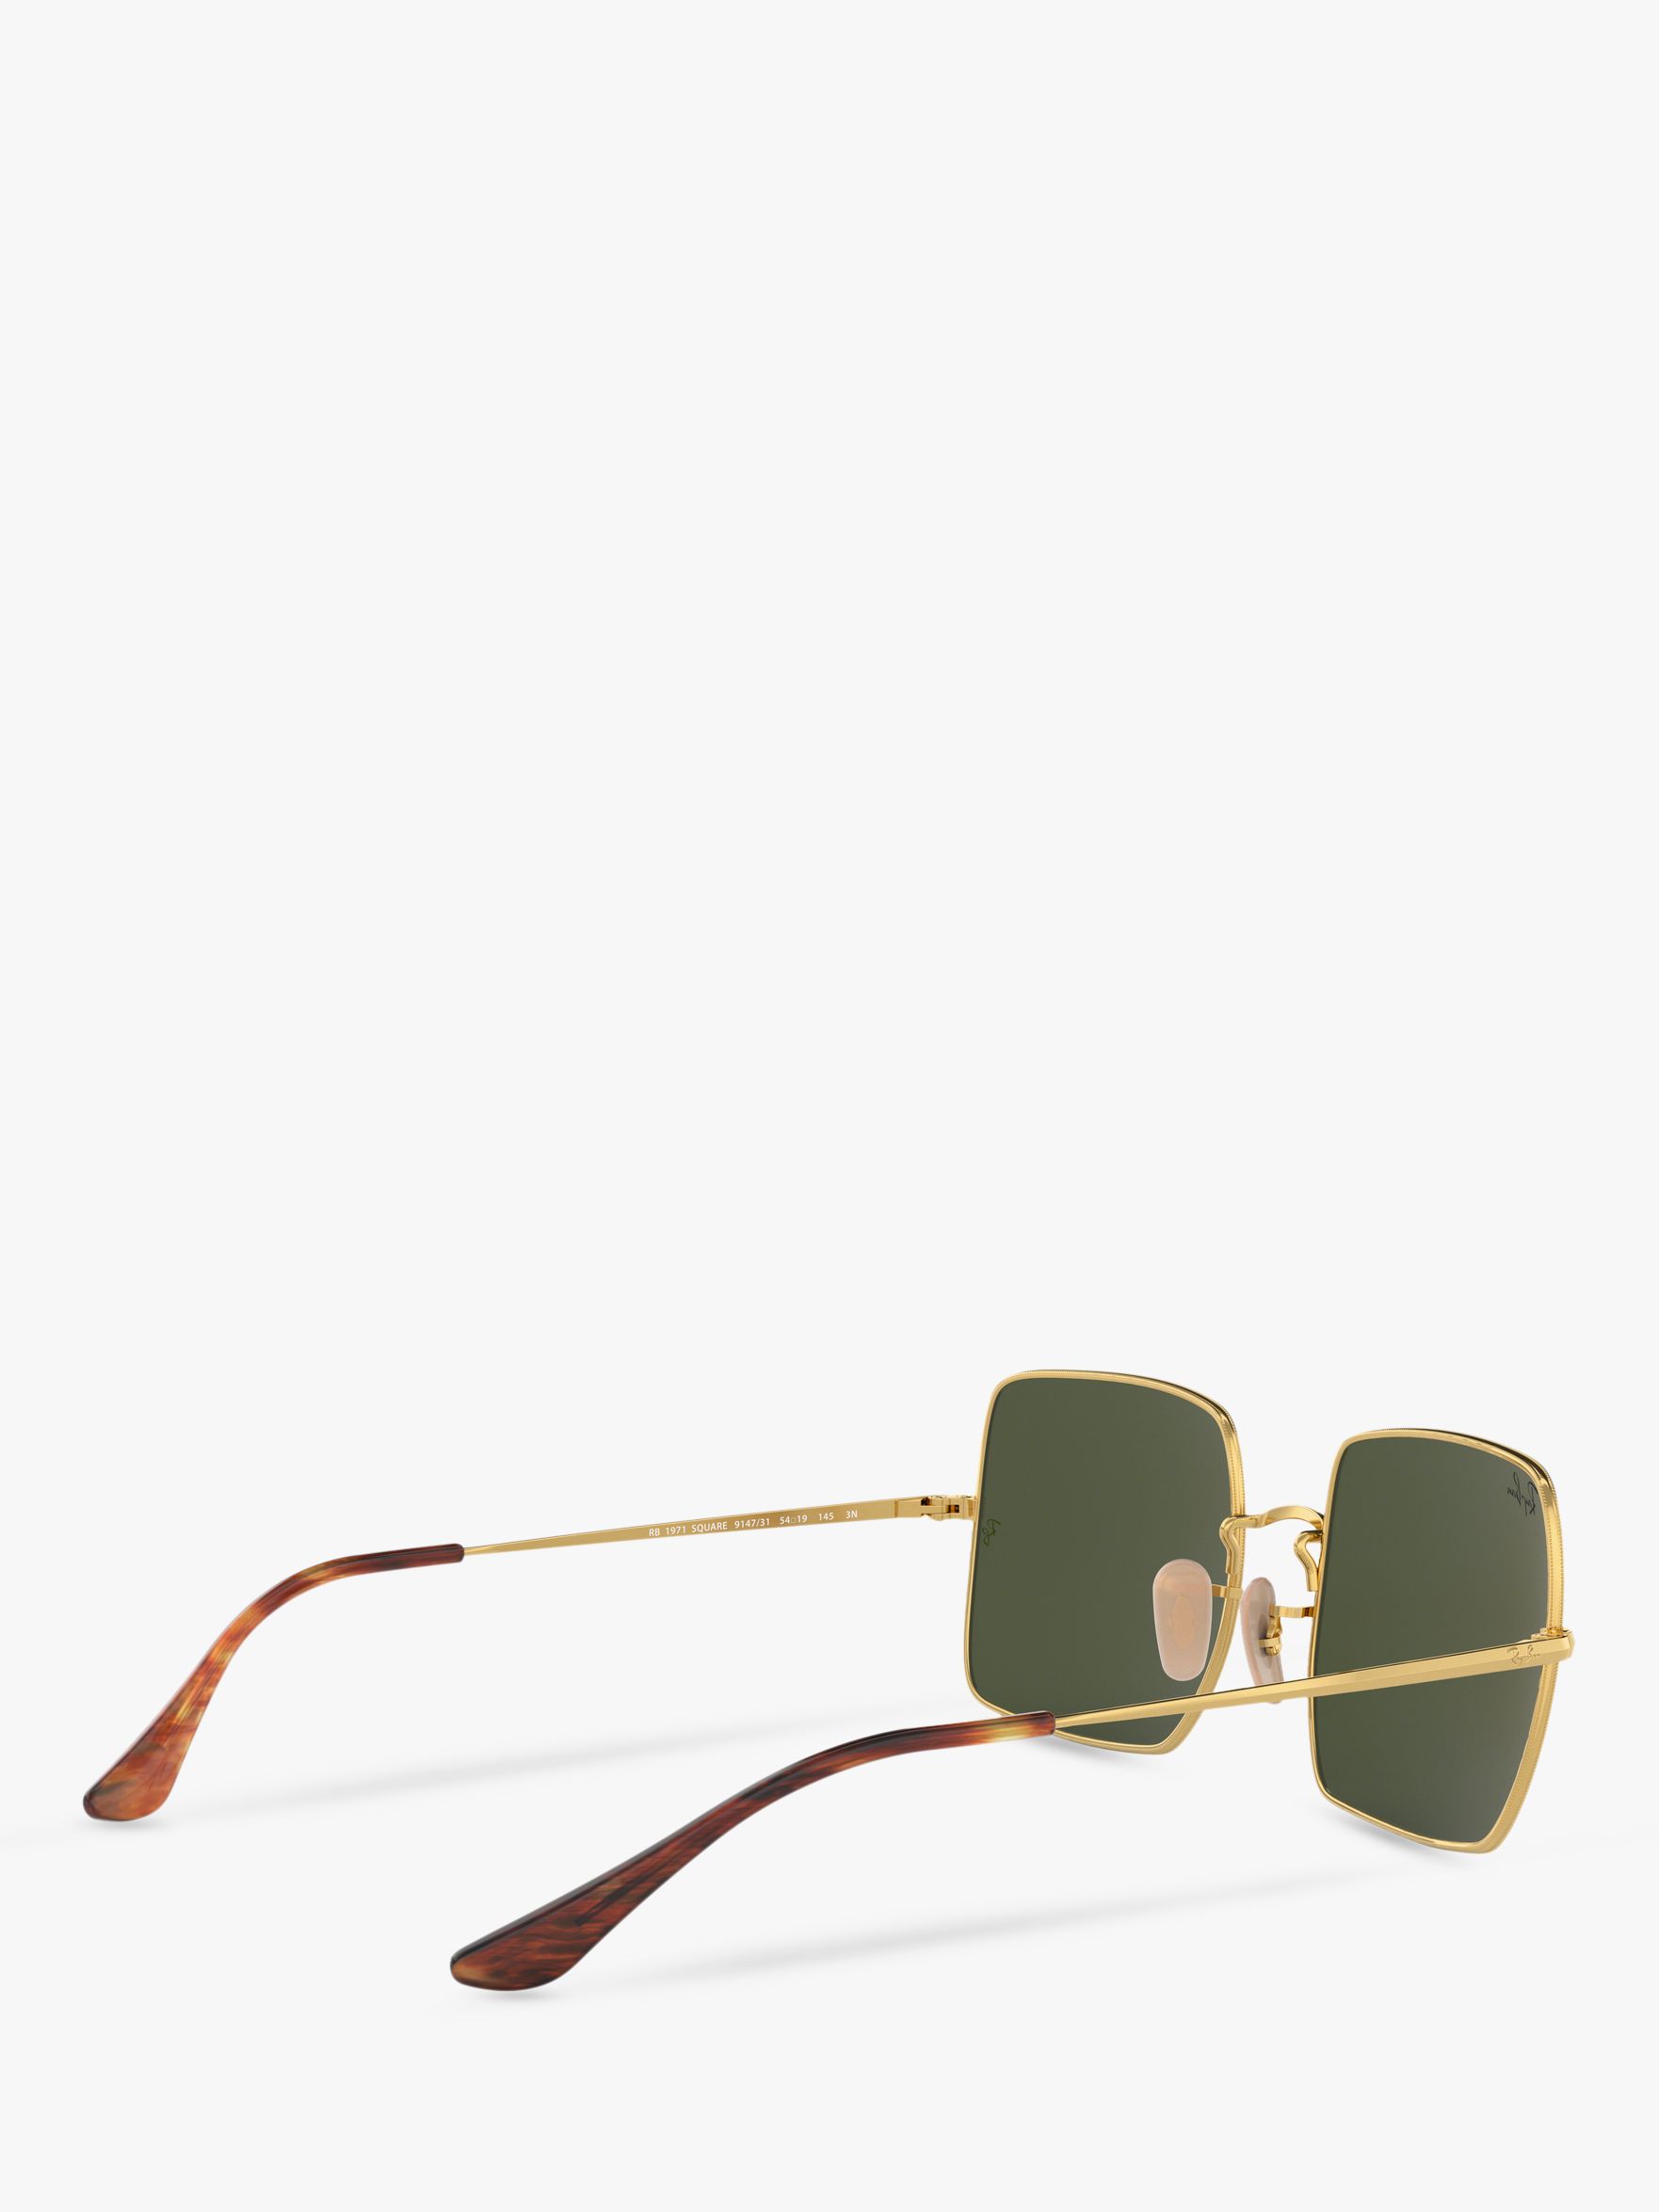 Ray-Ban RB1971 Unisex Square Sunglasses, Gold/Green at John Lewis ...